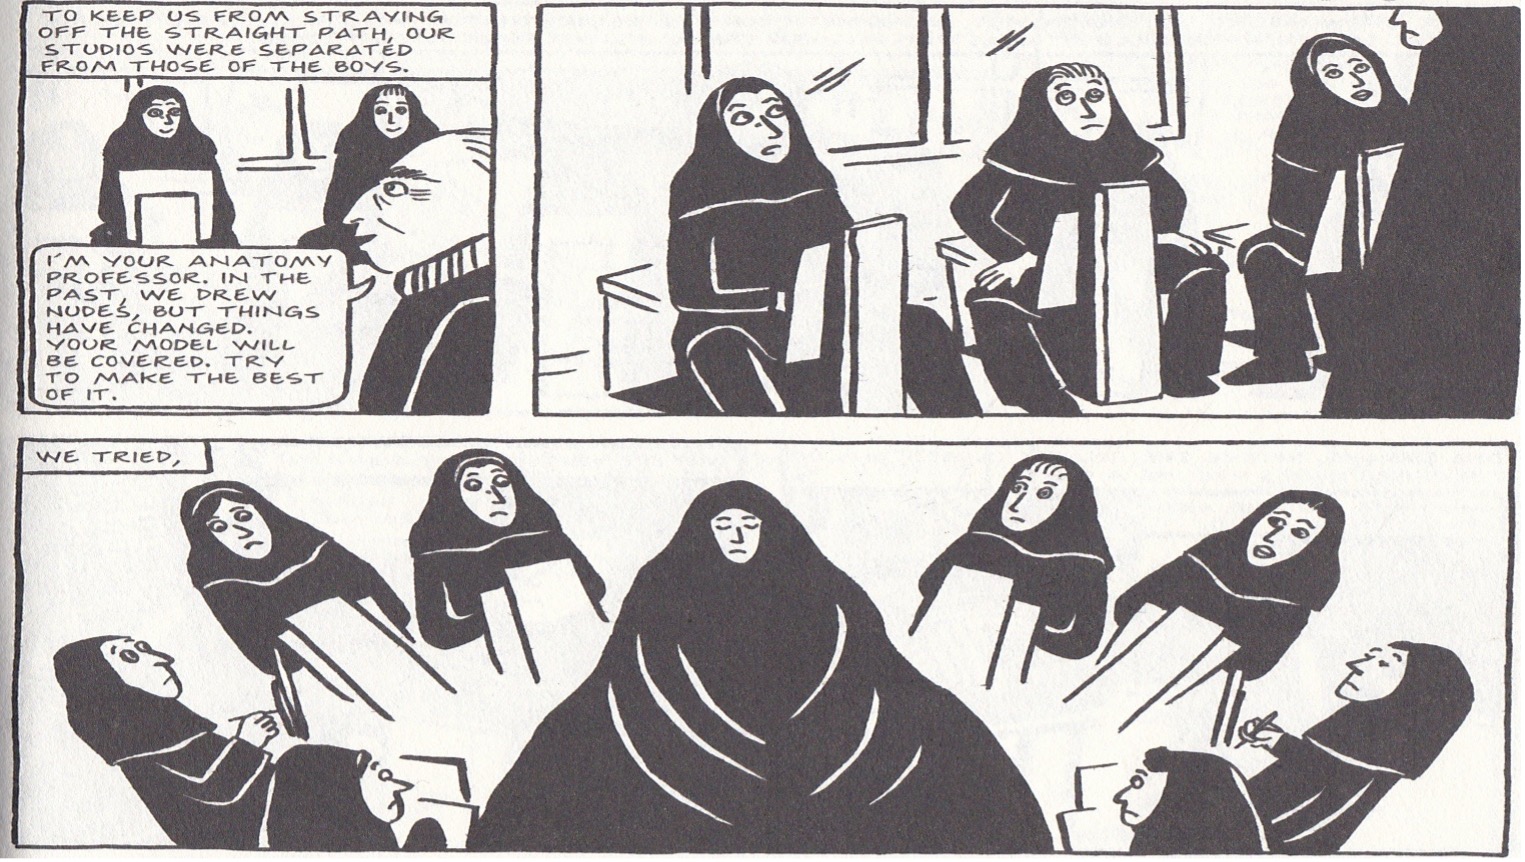 Figure 1. Satrapi, The Complete Persepolis, 299. Graphic Novel Excerpt from PERSEPOLIS 2: THE STORY OF A RETURN by Marjane Satrapi, translated by Anjali Singh, translation copyright © 2004 by Anjali Singh. Used by permission of Pantheon Books, an imprint of the Knopf Doubleday Publishing Group, a division of Penguin Random House LLC. All rights reserved.